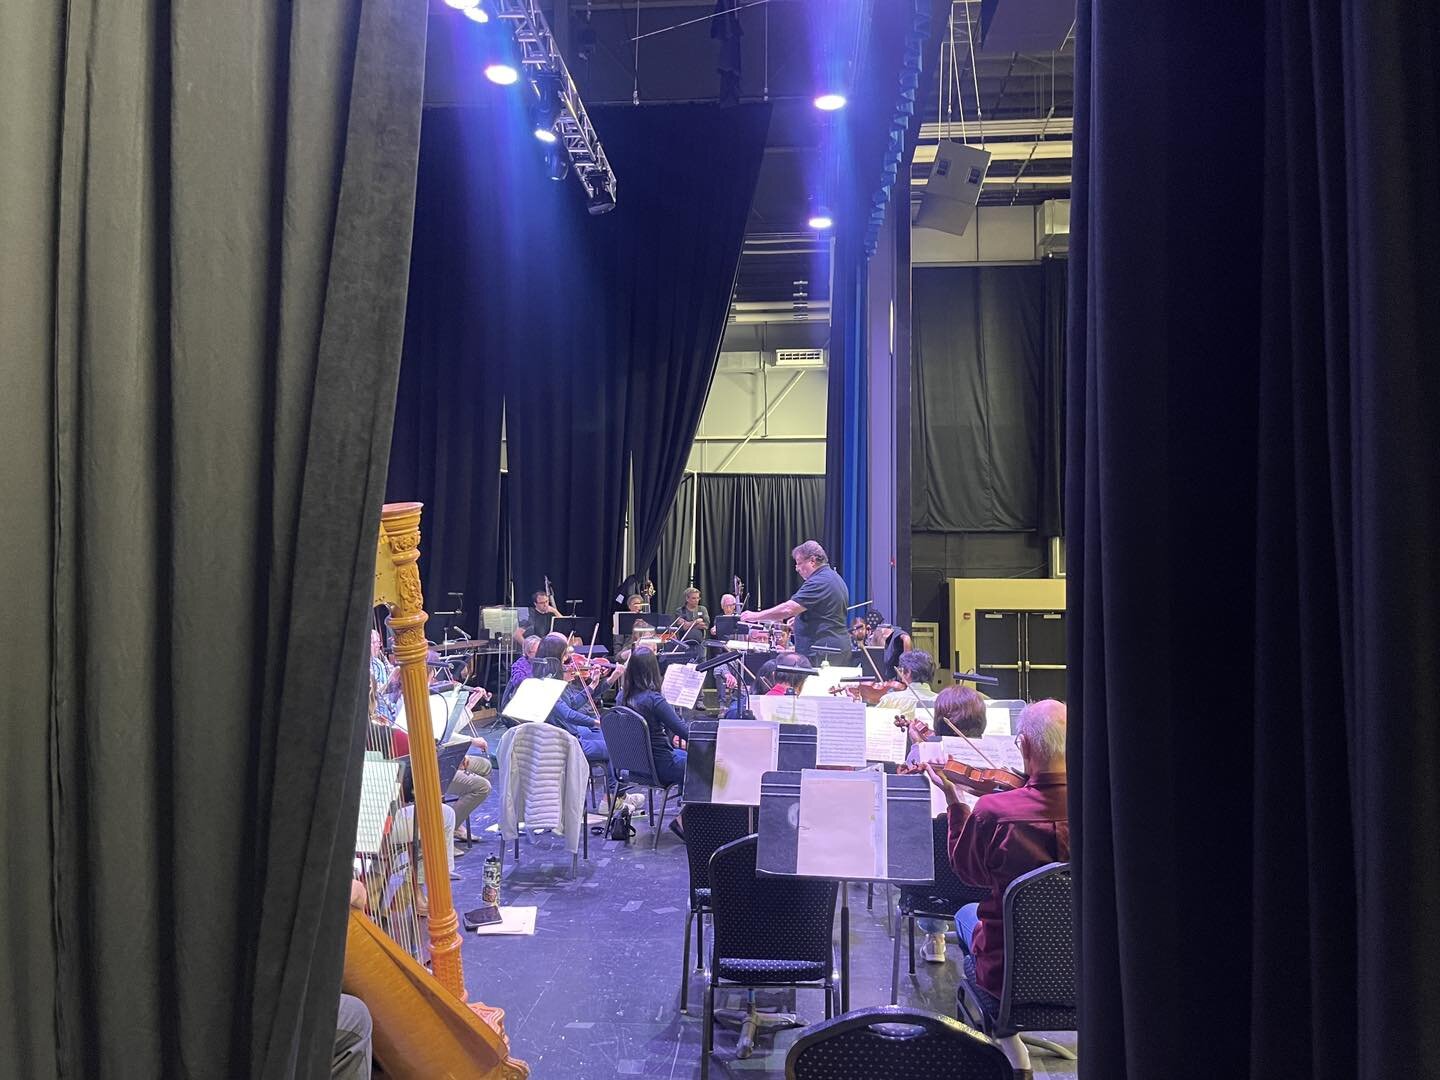 Join us Saturday for a musical journey through &quot;Heroes and Legends&quot; as we kick off our 70th season! Our first rehearsal is nothing short of magical, and we can't wait to share it with you.

Get ready for an unforgettable evening featuring:
